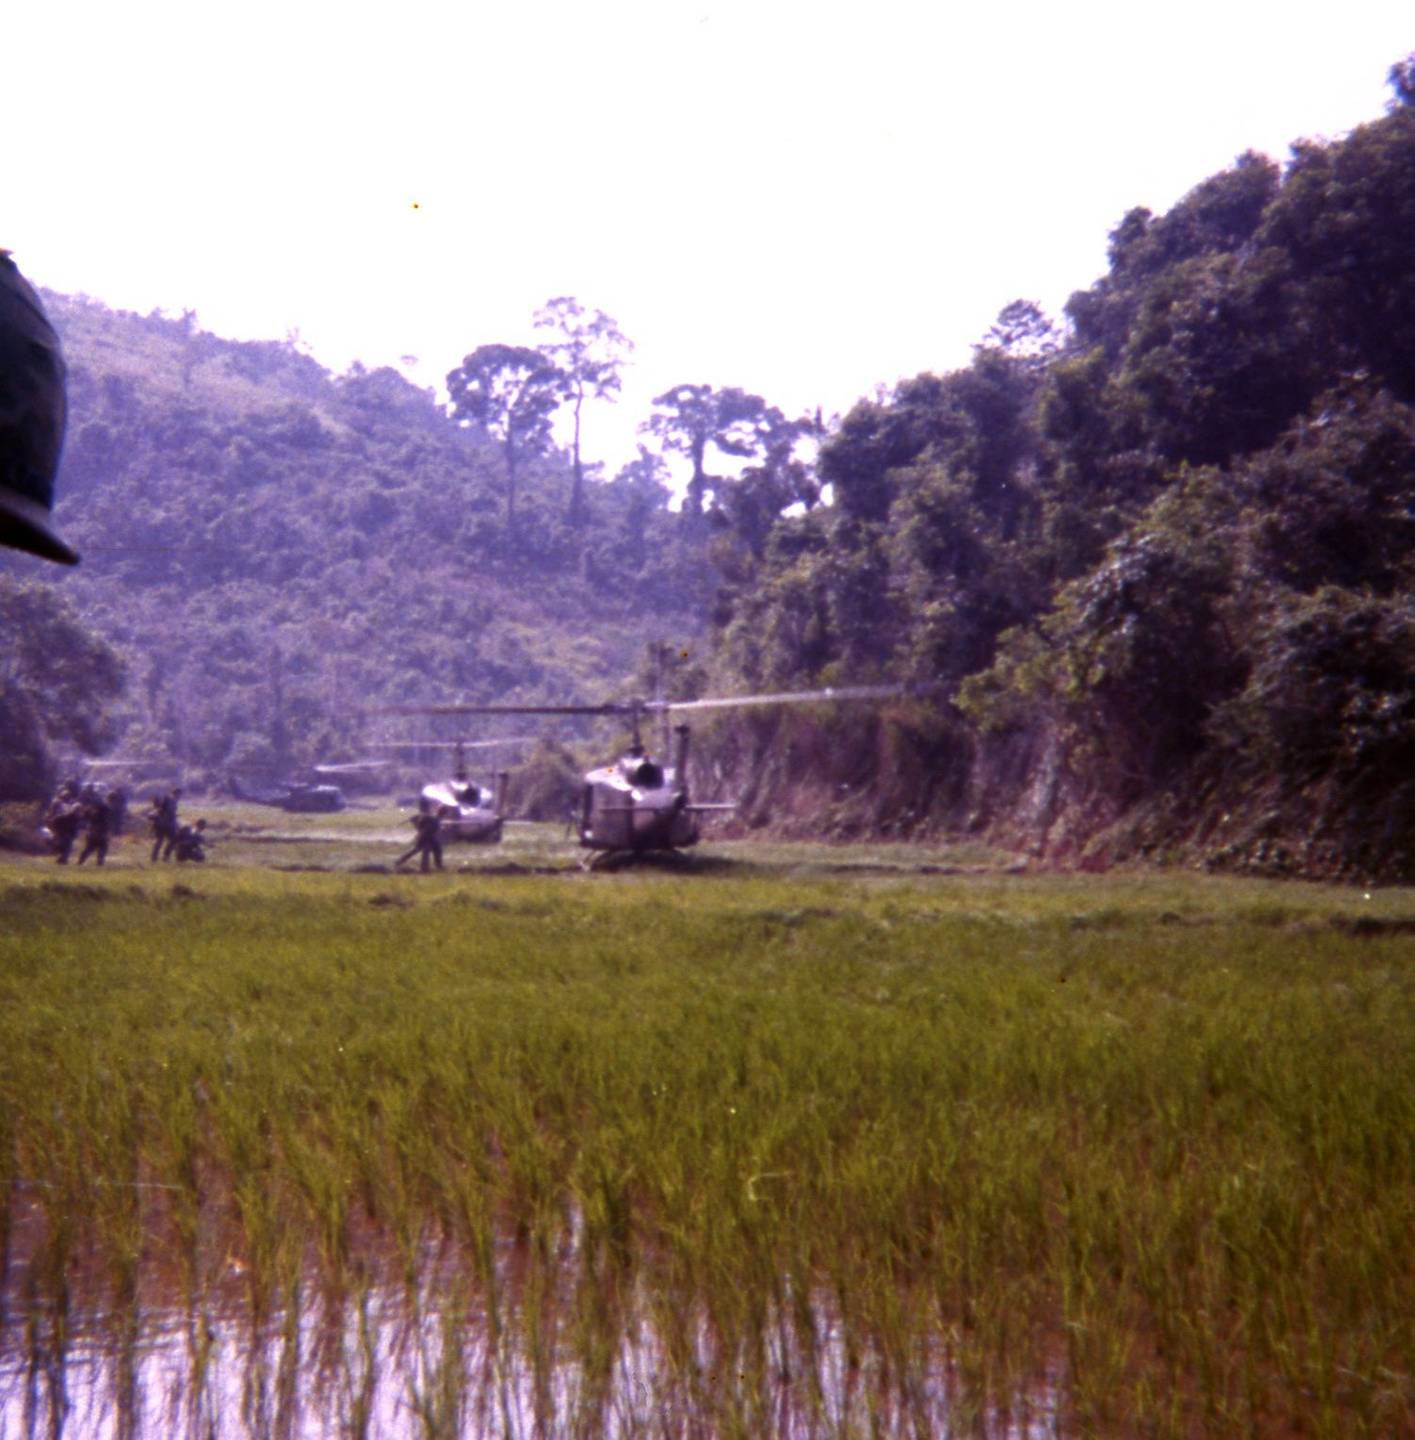 A rice paddy in a valley, helicopters on solid ground in the distance.